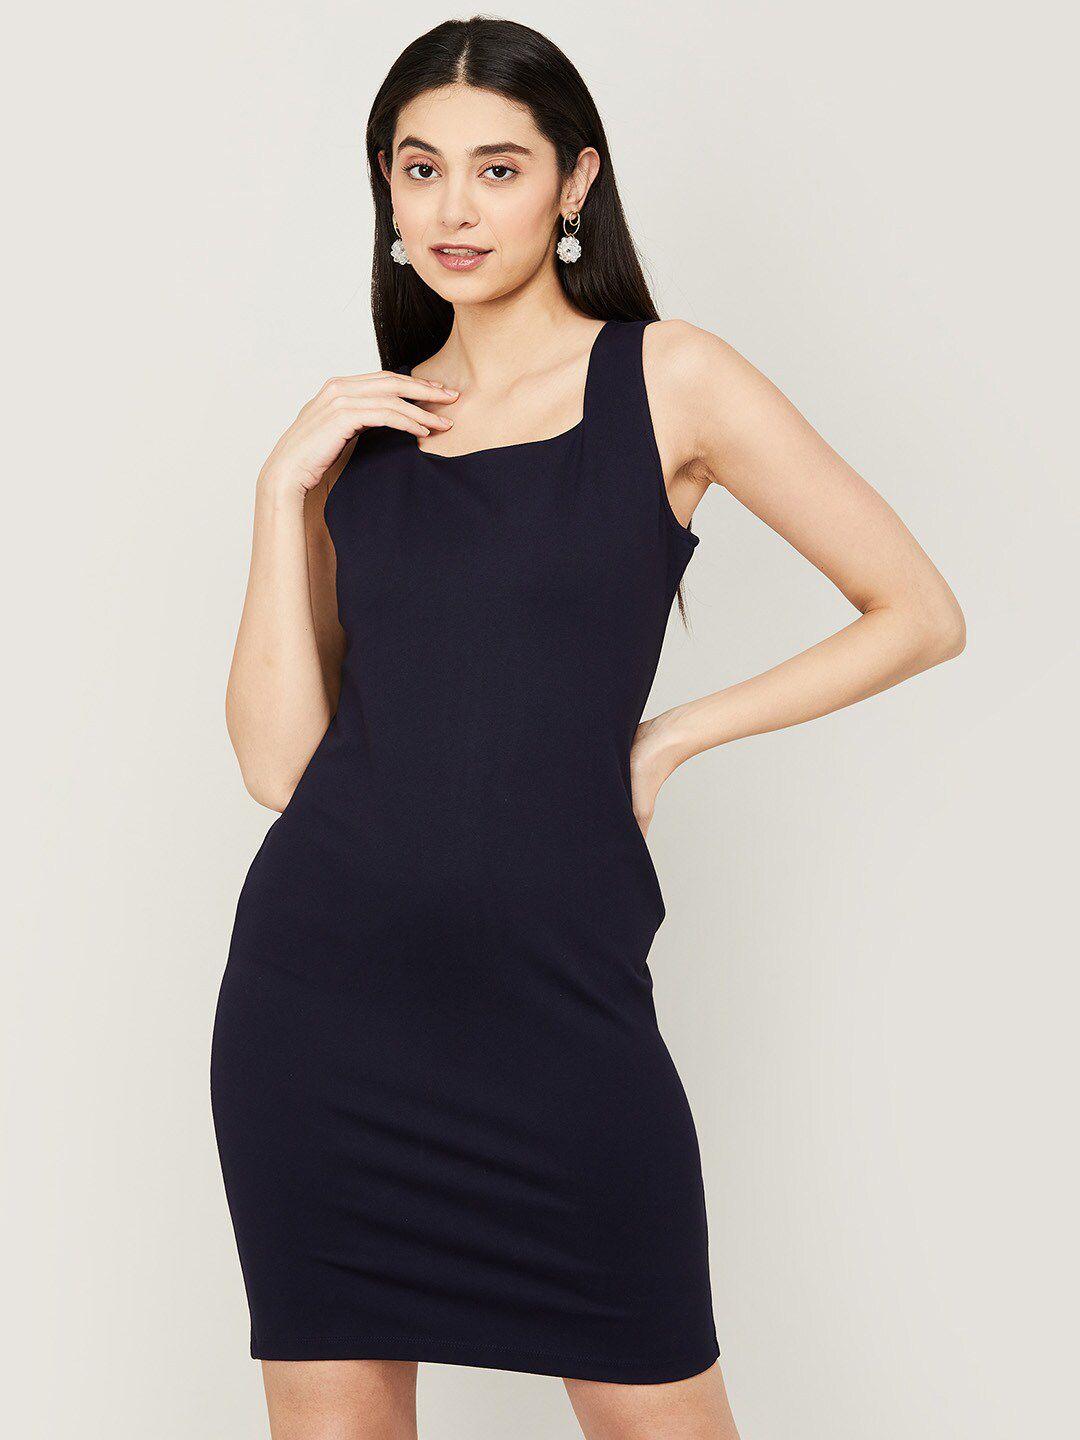 code by lifestyle navy blue bodycon dress